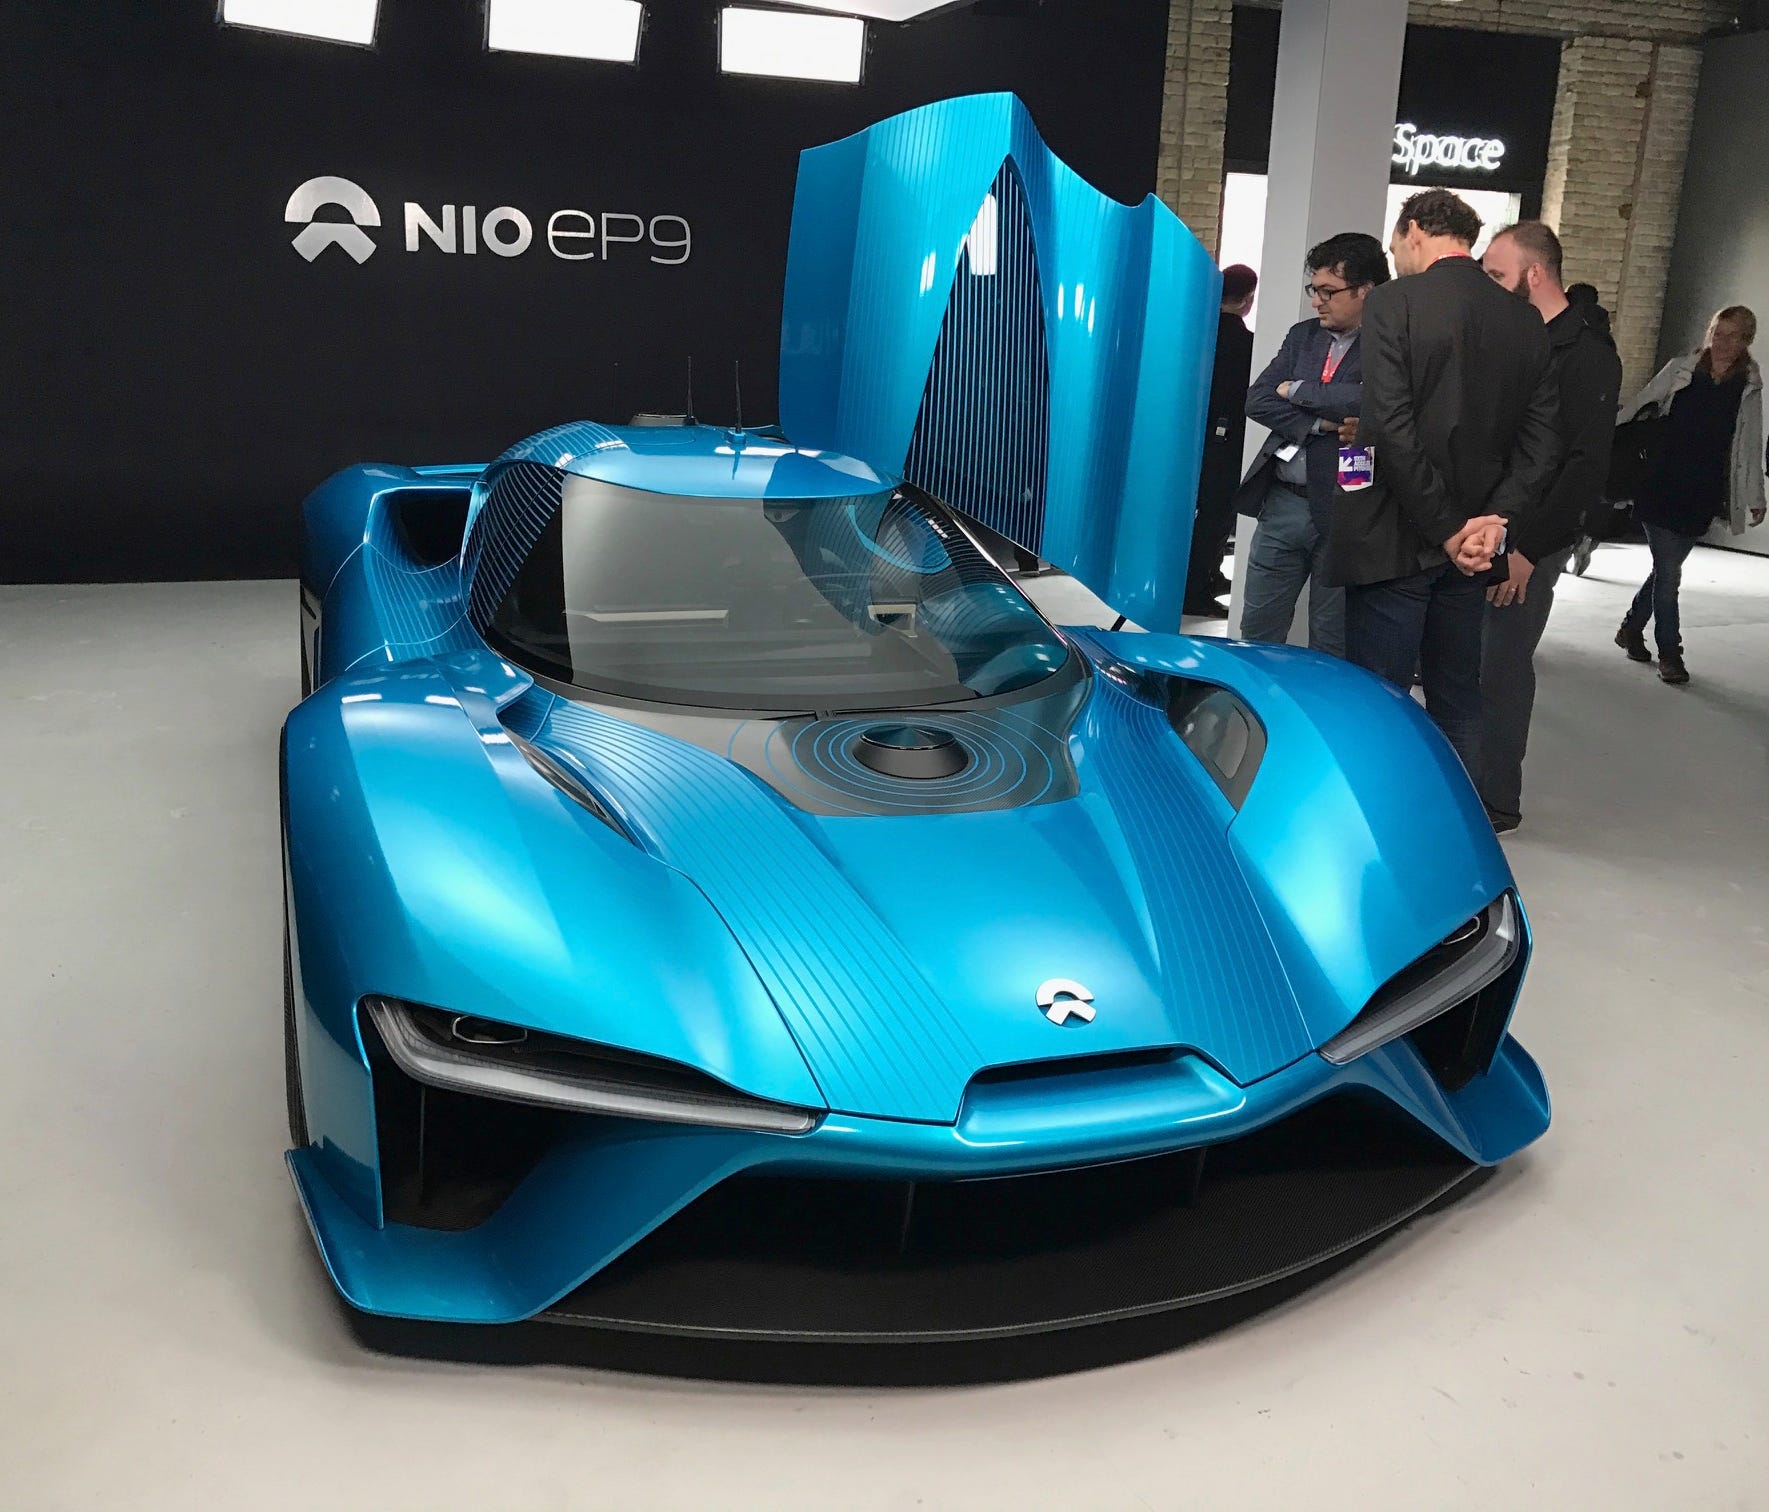 The NIO EP9, which recently set a track record for autonomous cars at Austin's F1 racetrack, lured crowds at SXSW 2017.